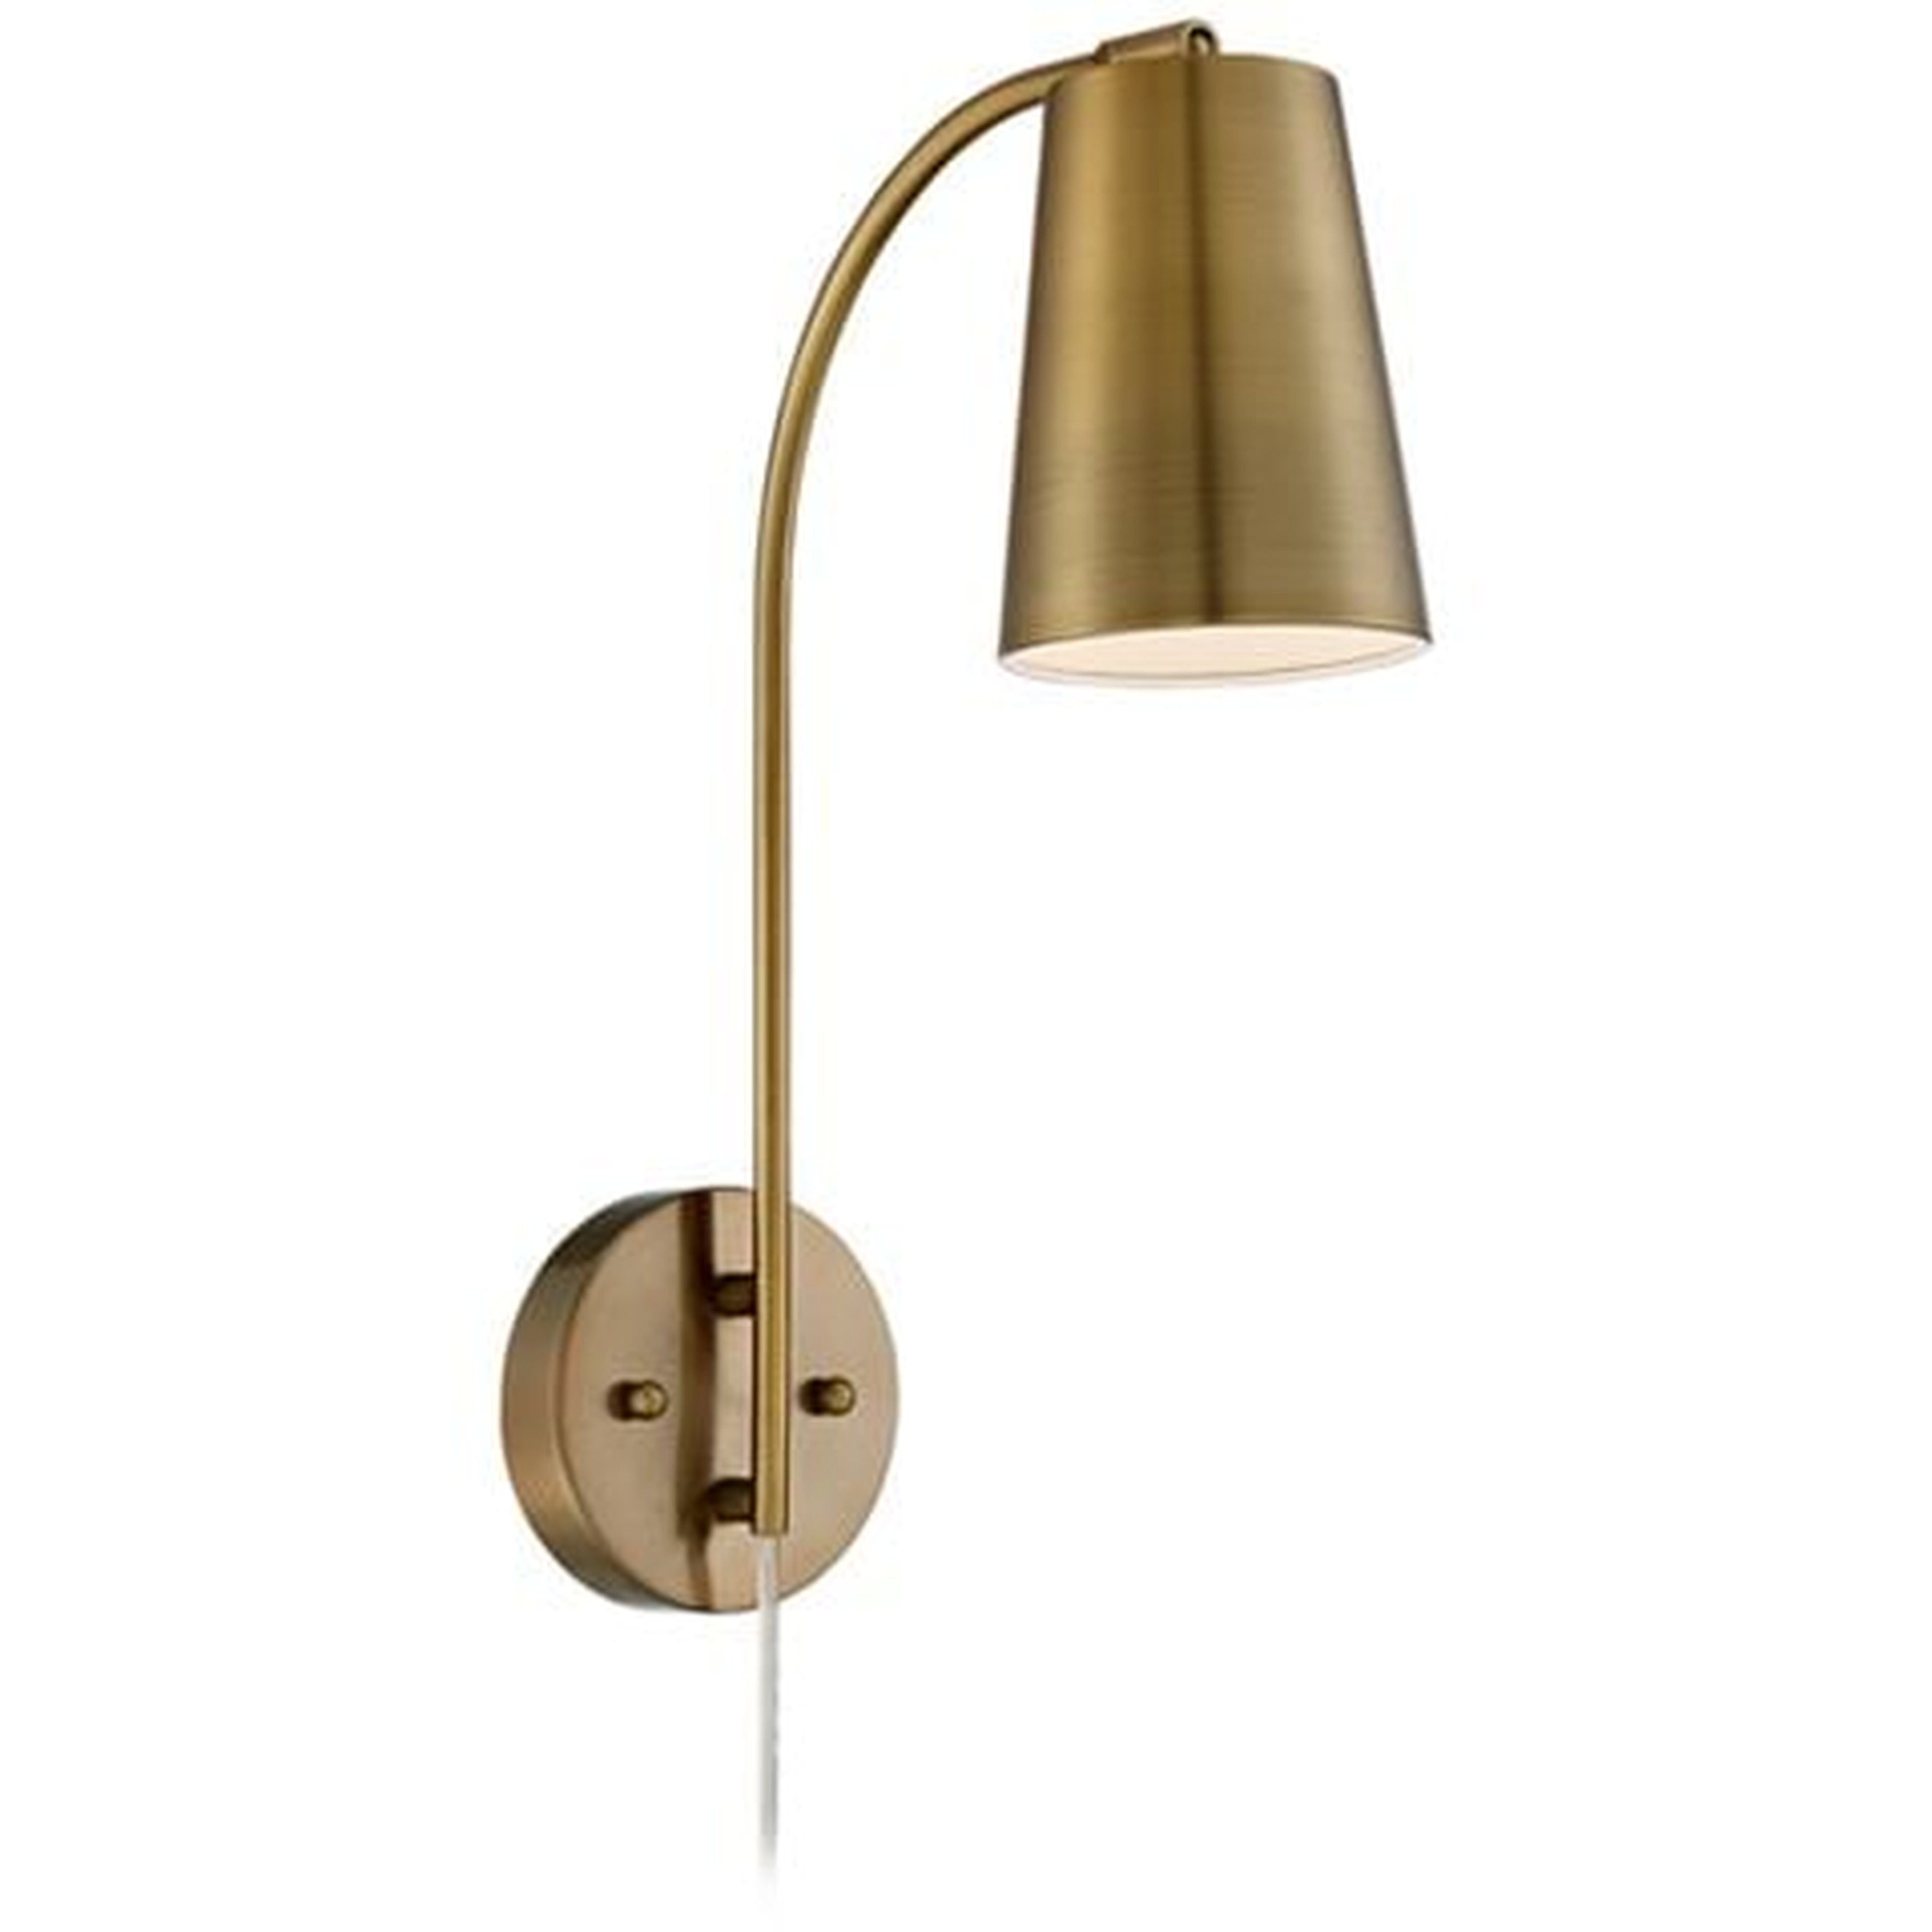 Sully Warm Brass Plug-In Wall Lamp - Lamps Plus